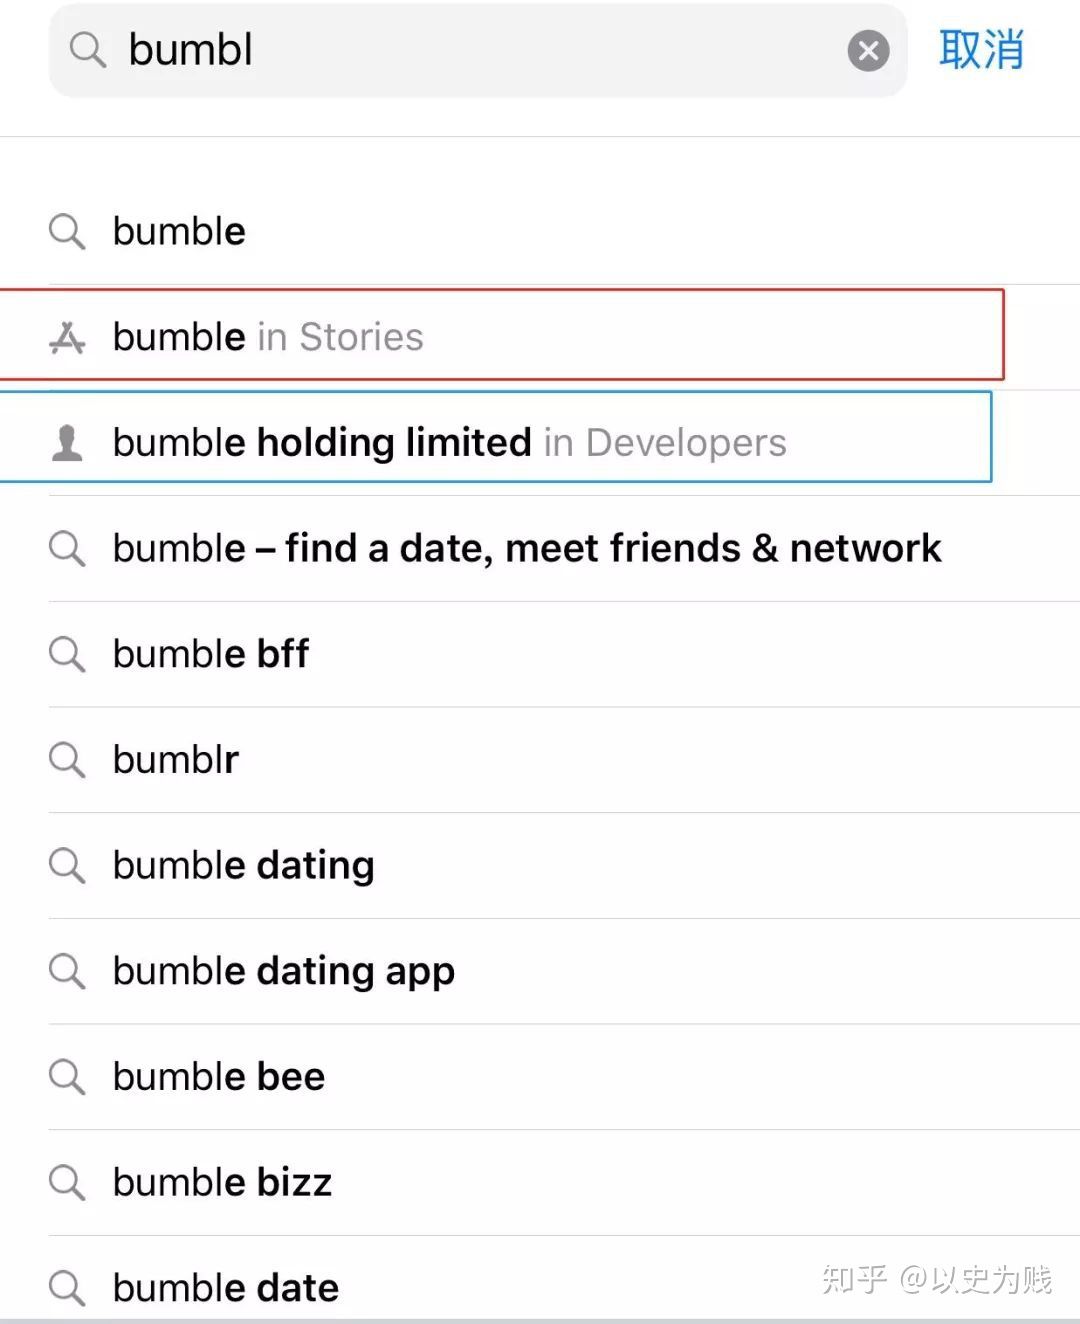 Bumble in Stories